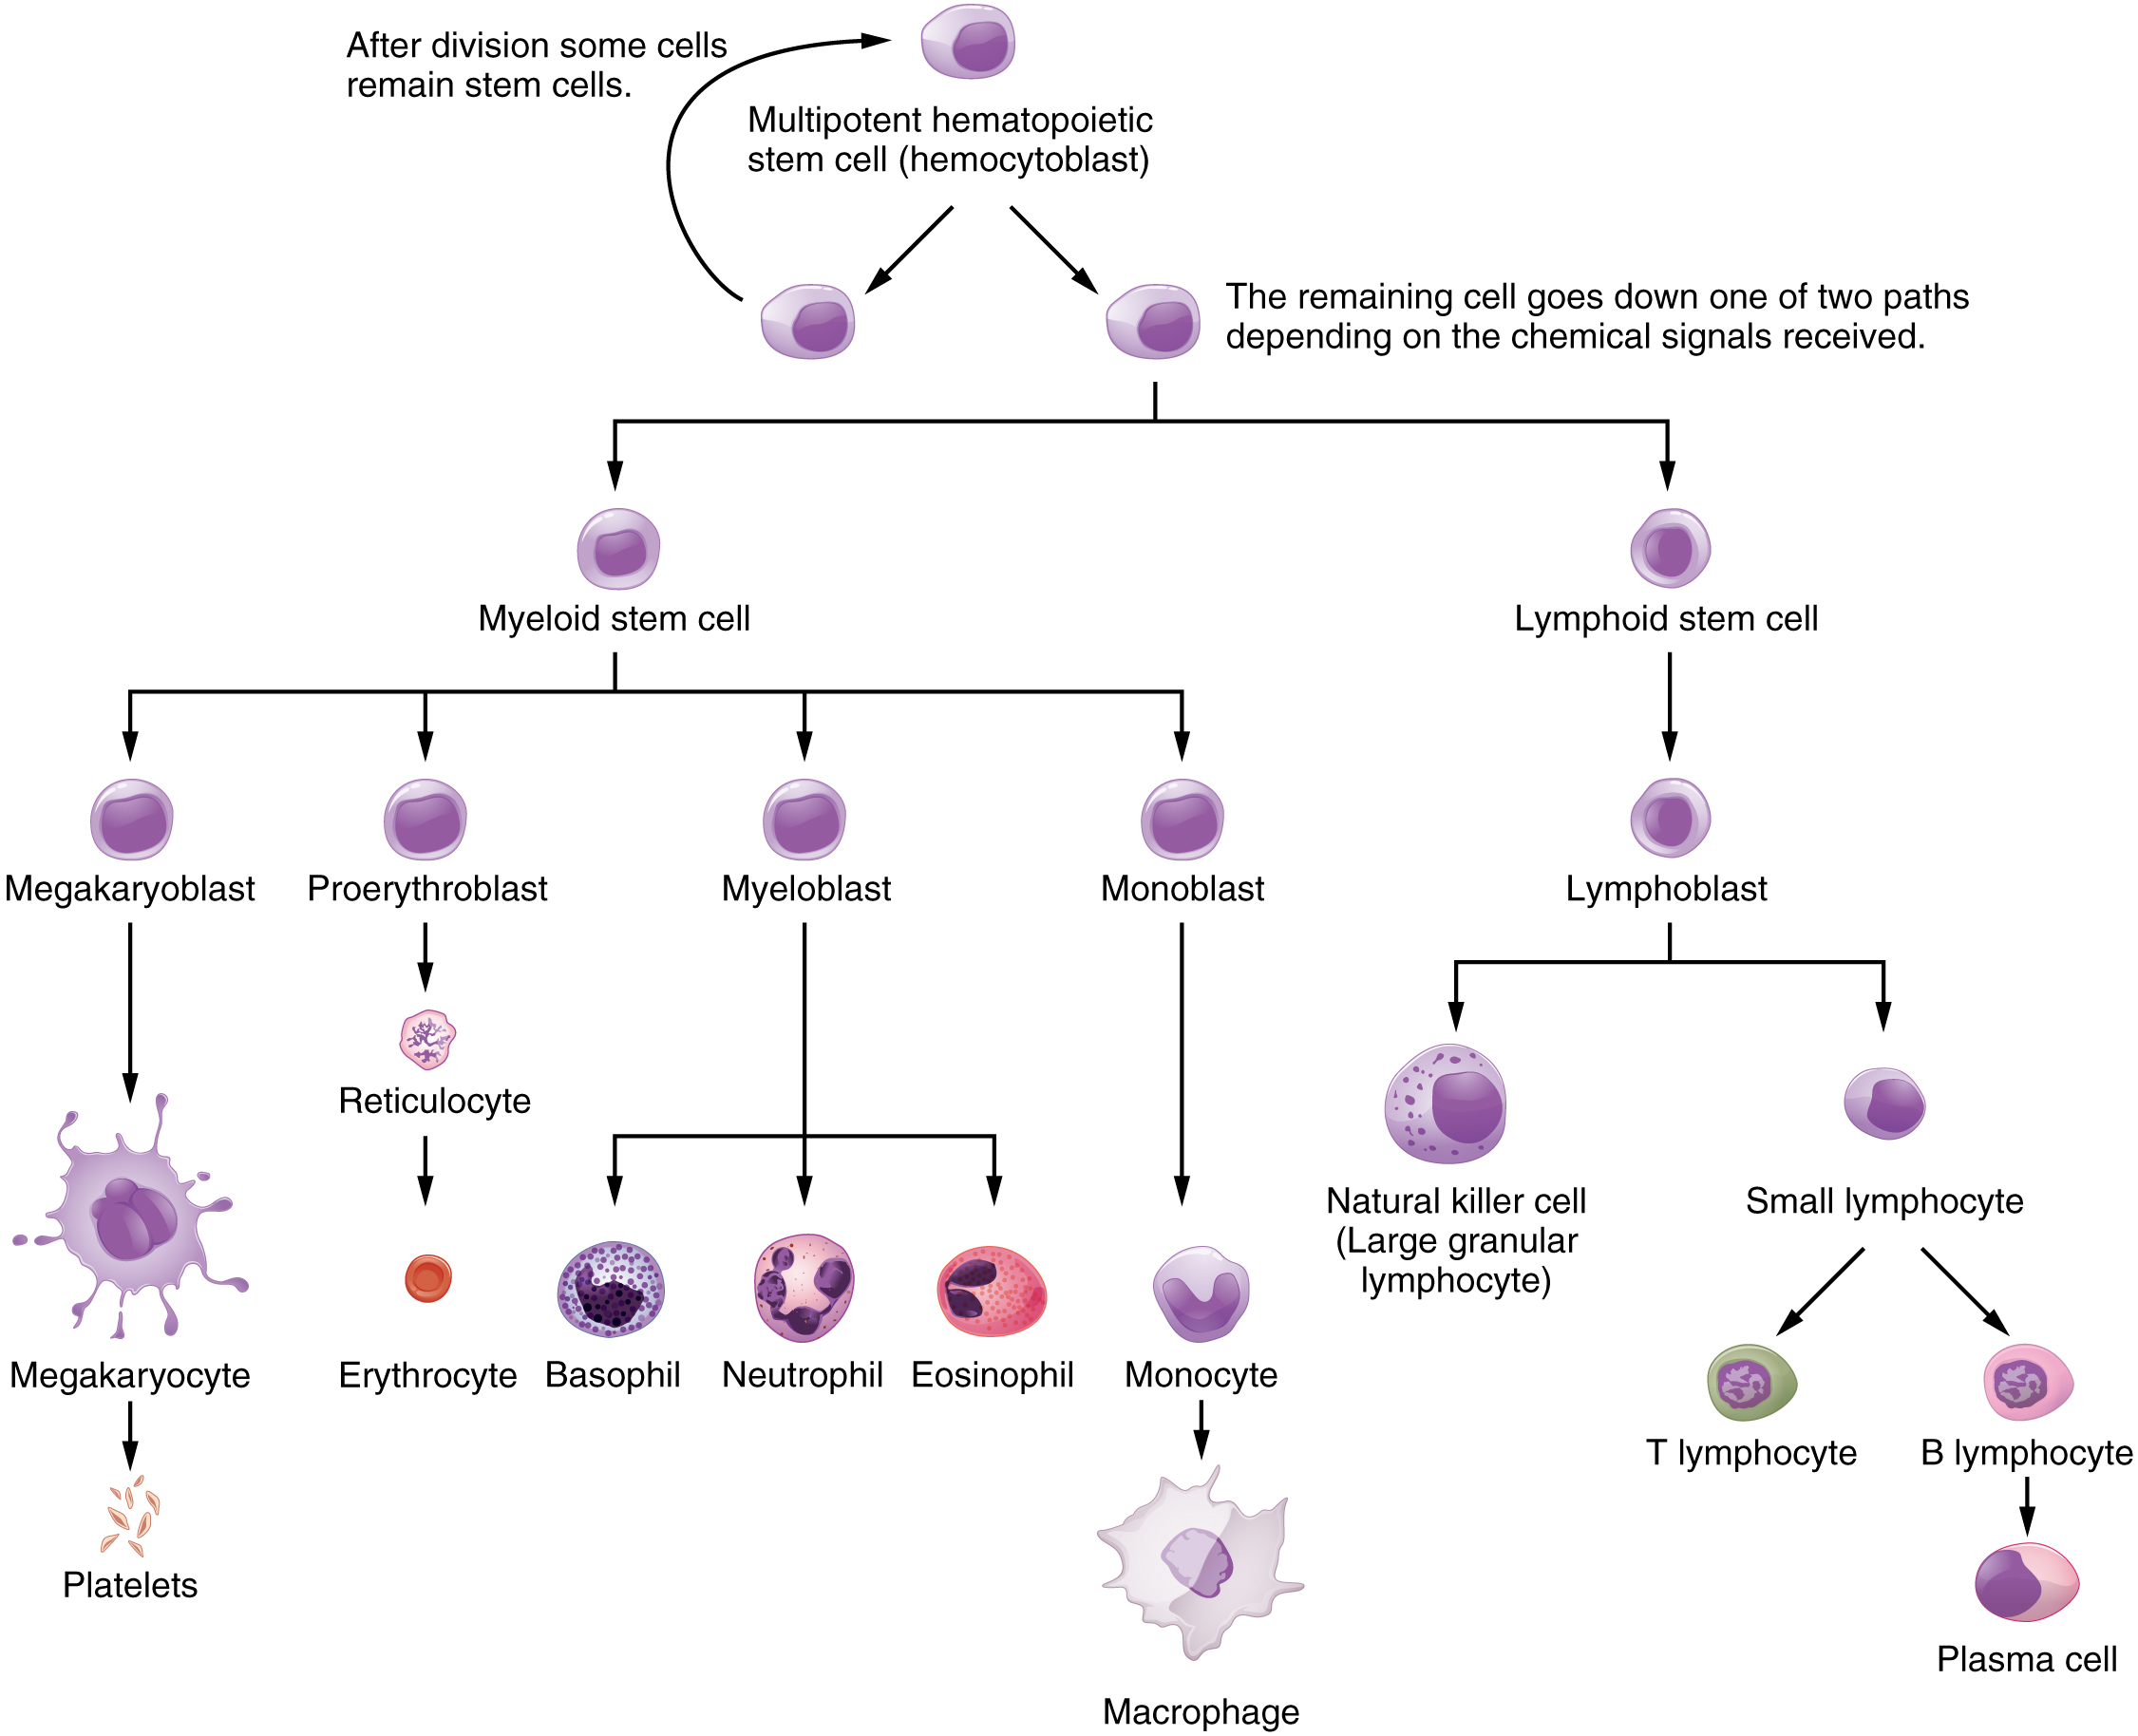 This flowchart shows the steps in which a multipotential hematopoietic stem cell differentiates into the different cell types in blood.